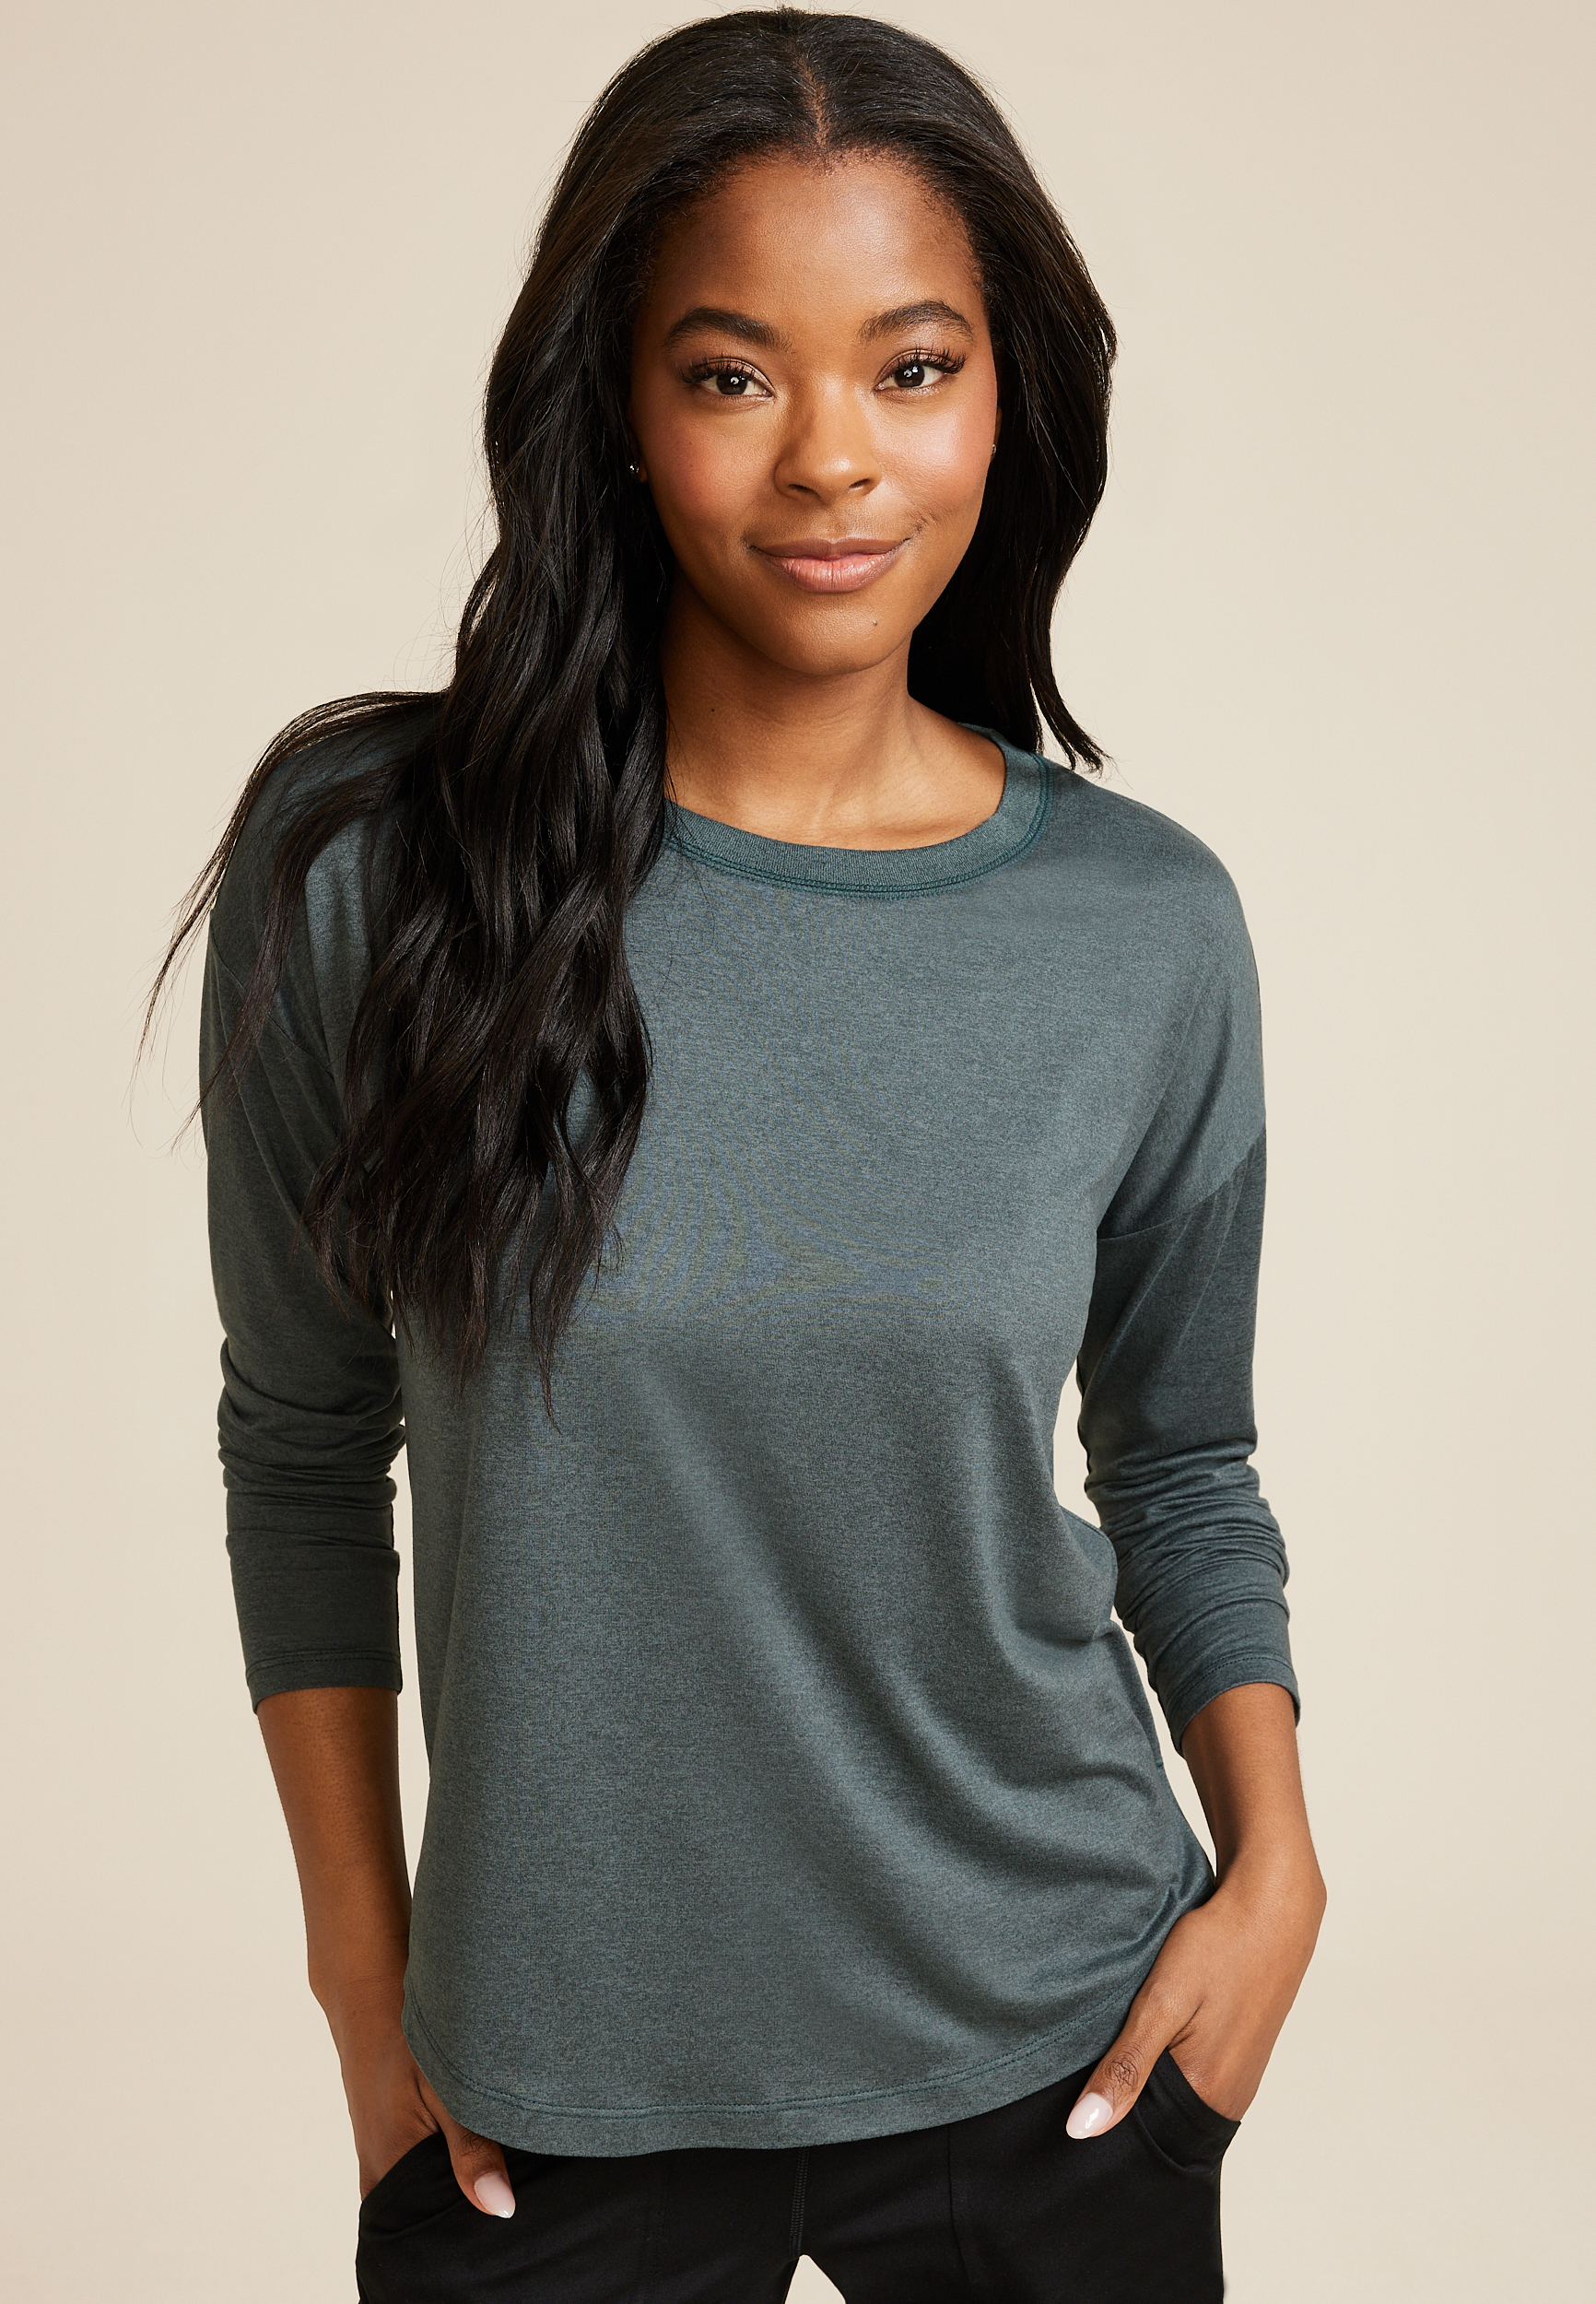 New Arrival Tops: Trendy Sweaters, Blouses, Tanks & More